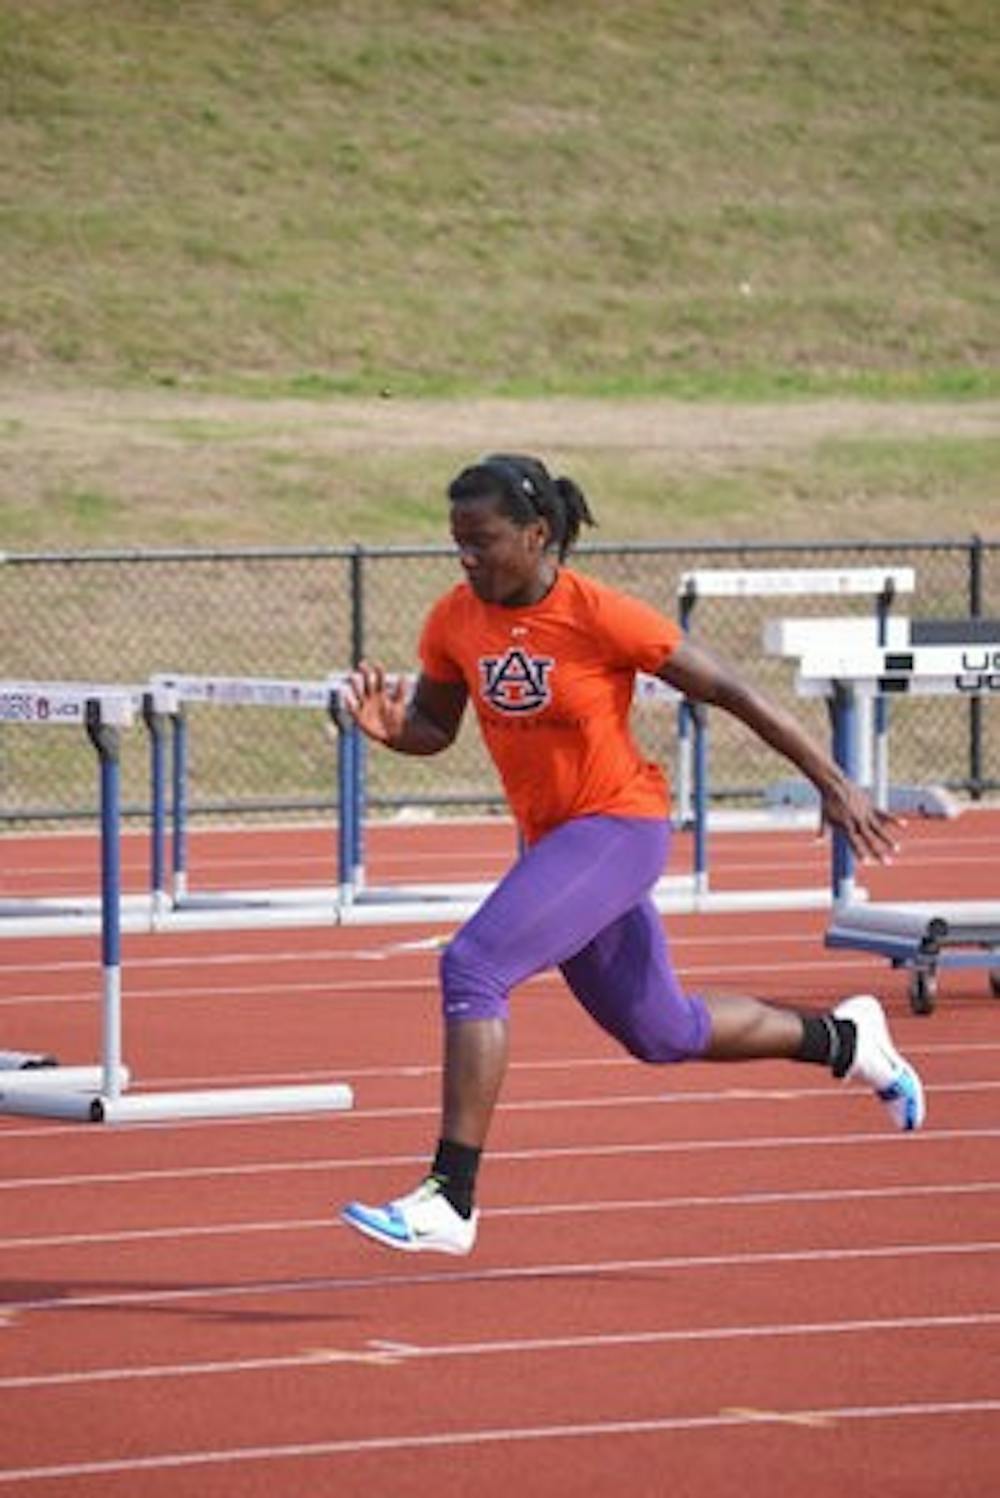 After the Alabama Relays, the team will split up to participate in both the Texas Relays and the North Florida Invitational. (Danielle Lowe / ASSISTANT PHOTO EDITOR)